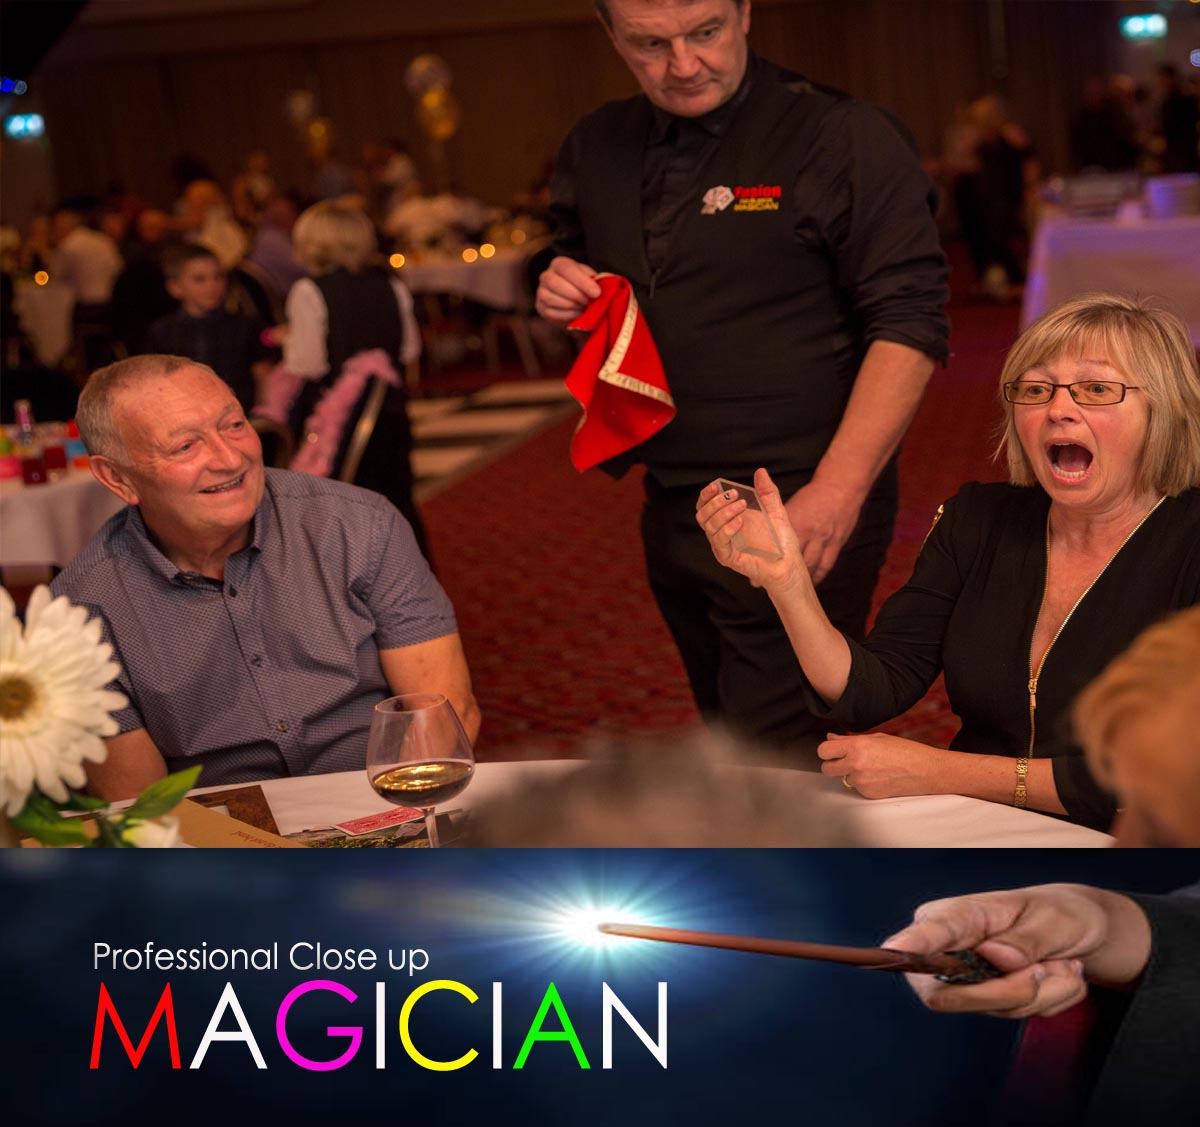 Corporate Magician for Hire